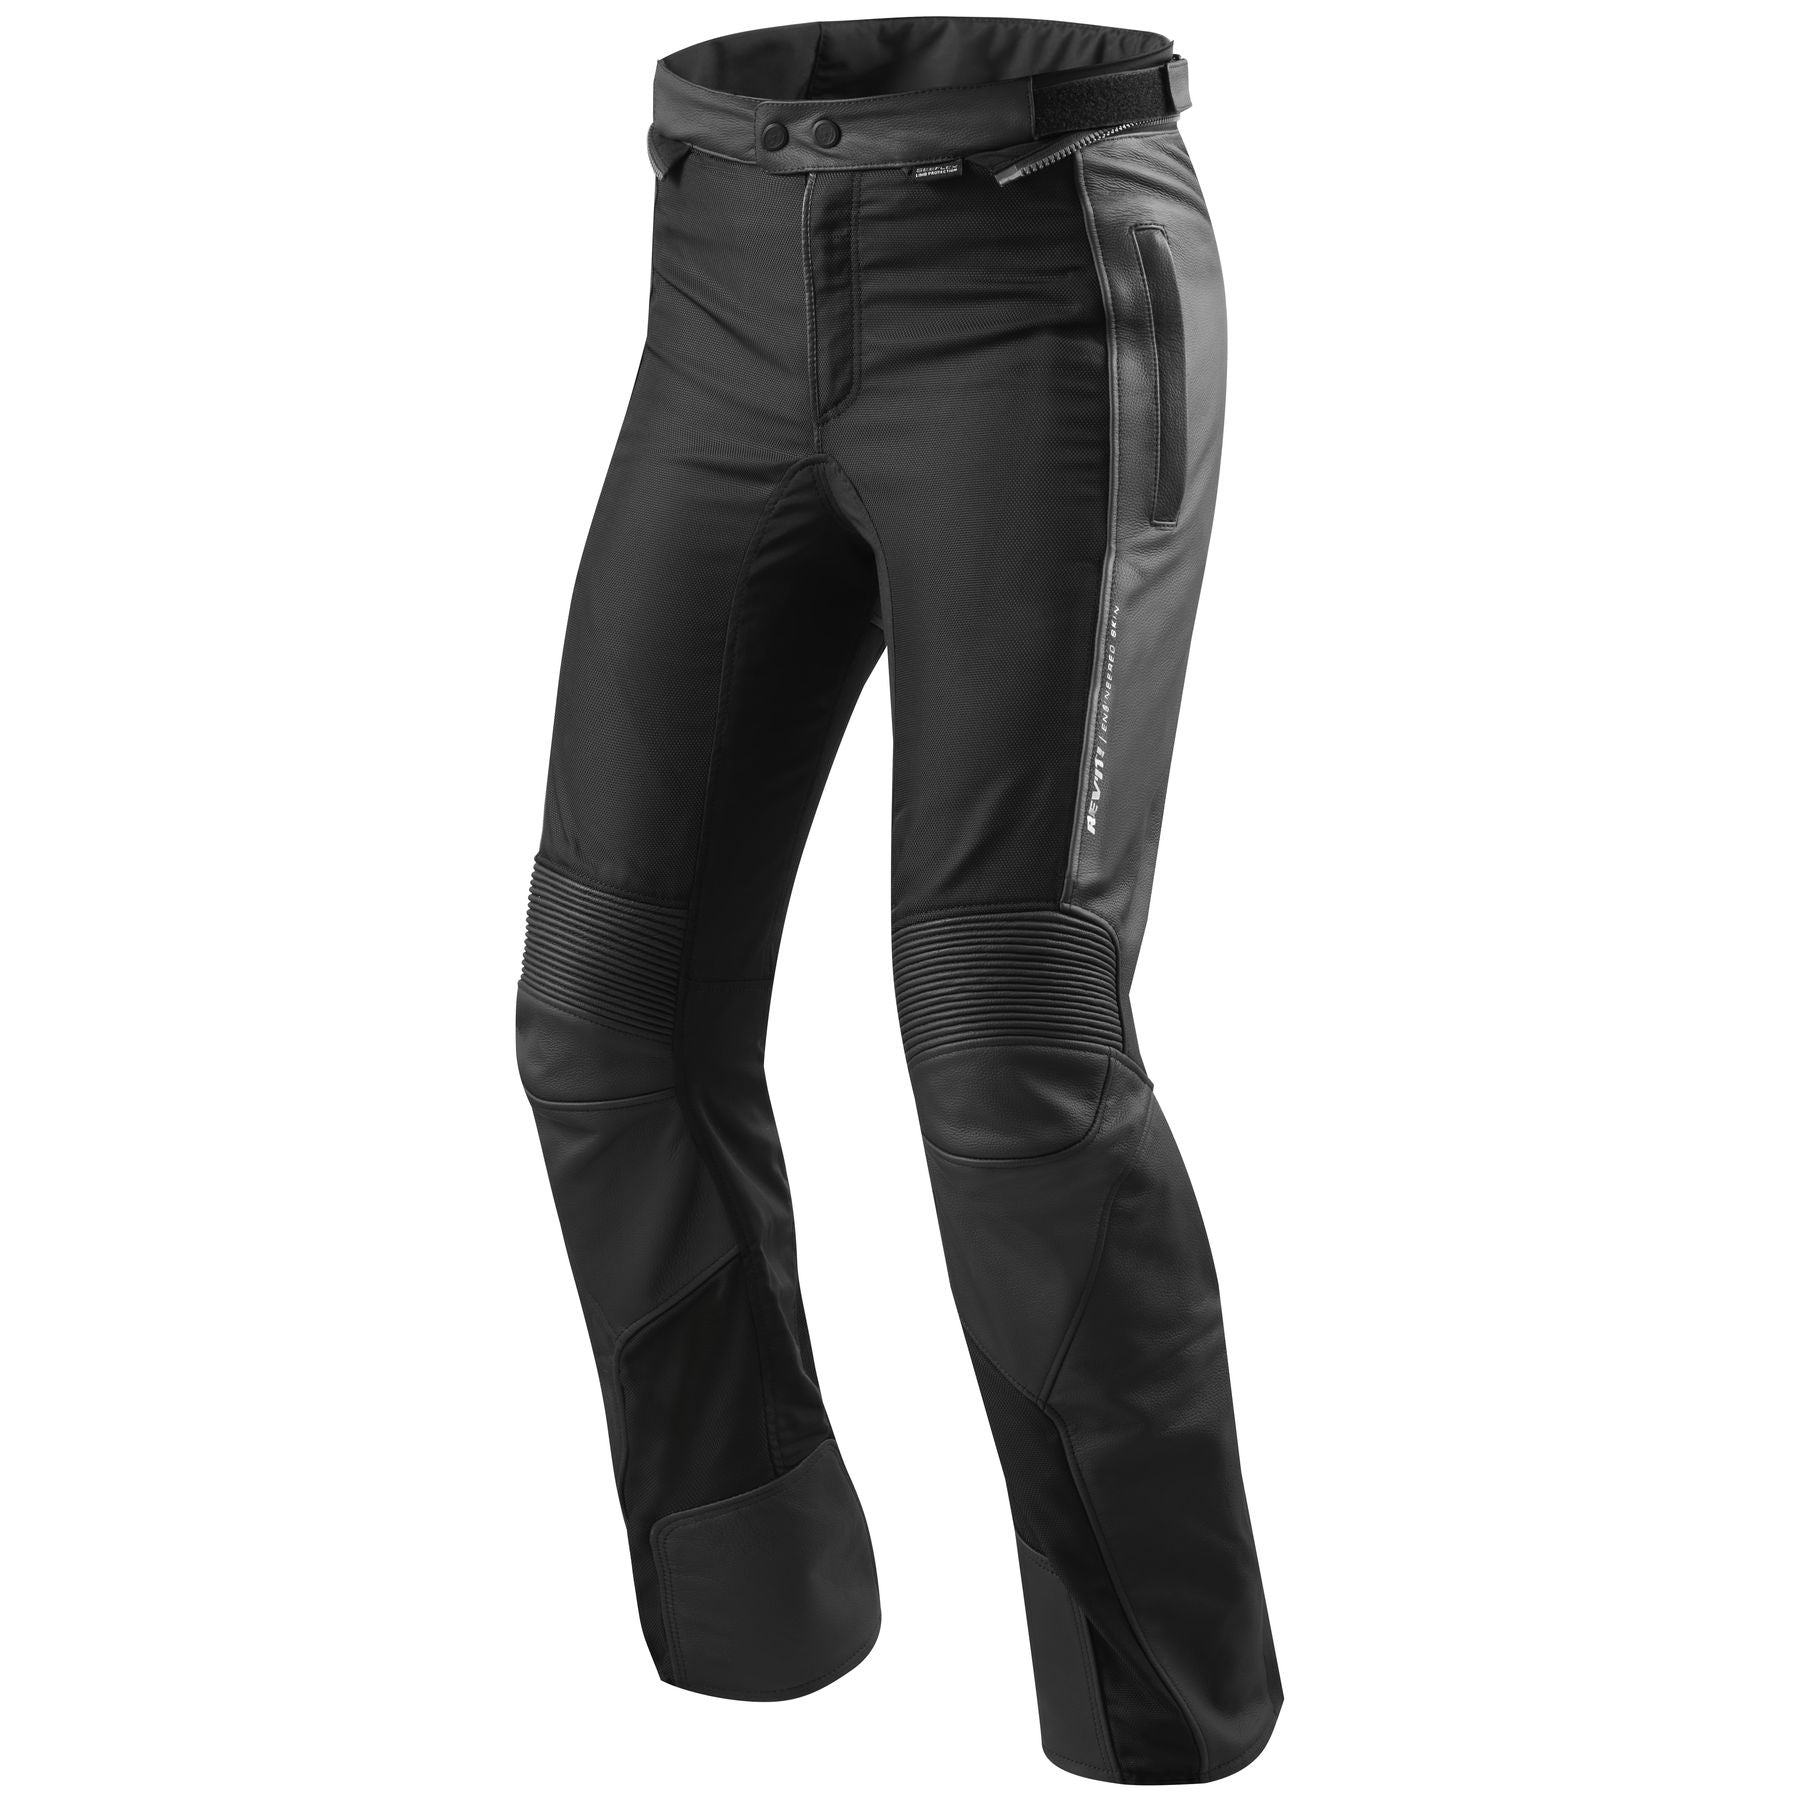 REVIT Eclipse Mesh Motorcycle Trousers Review  YouTube